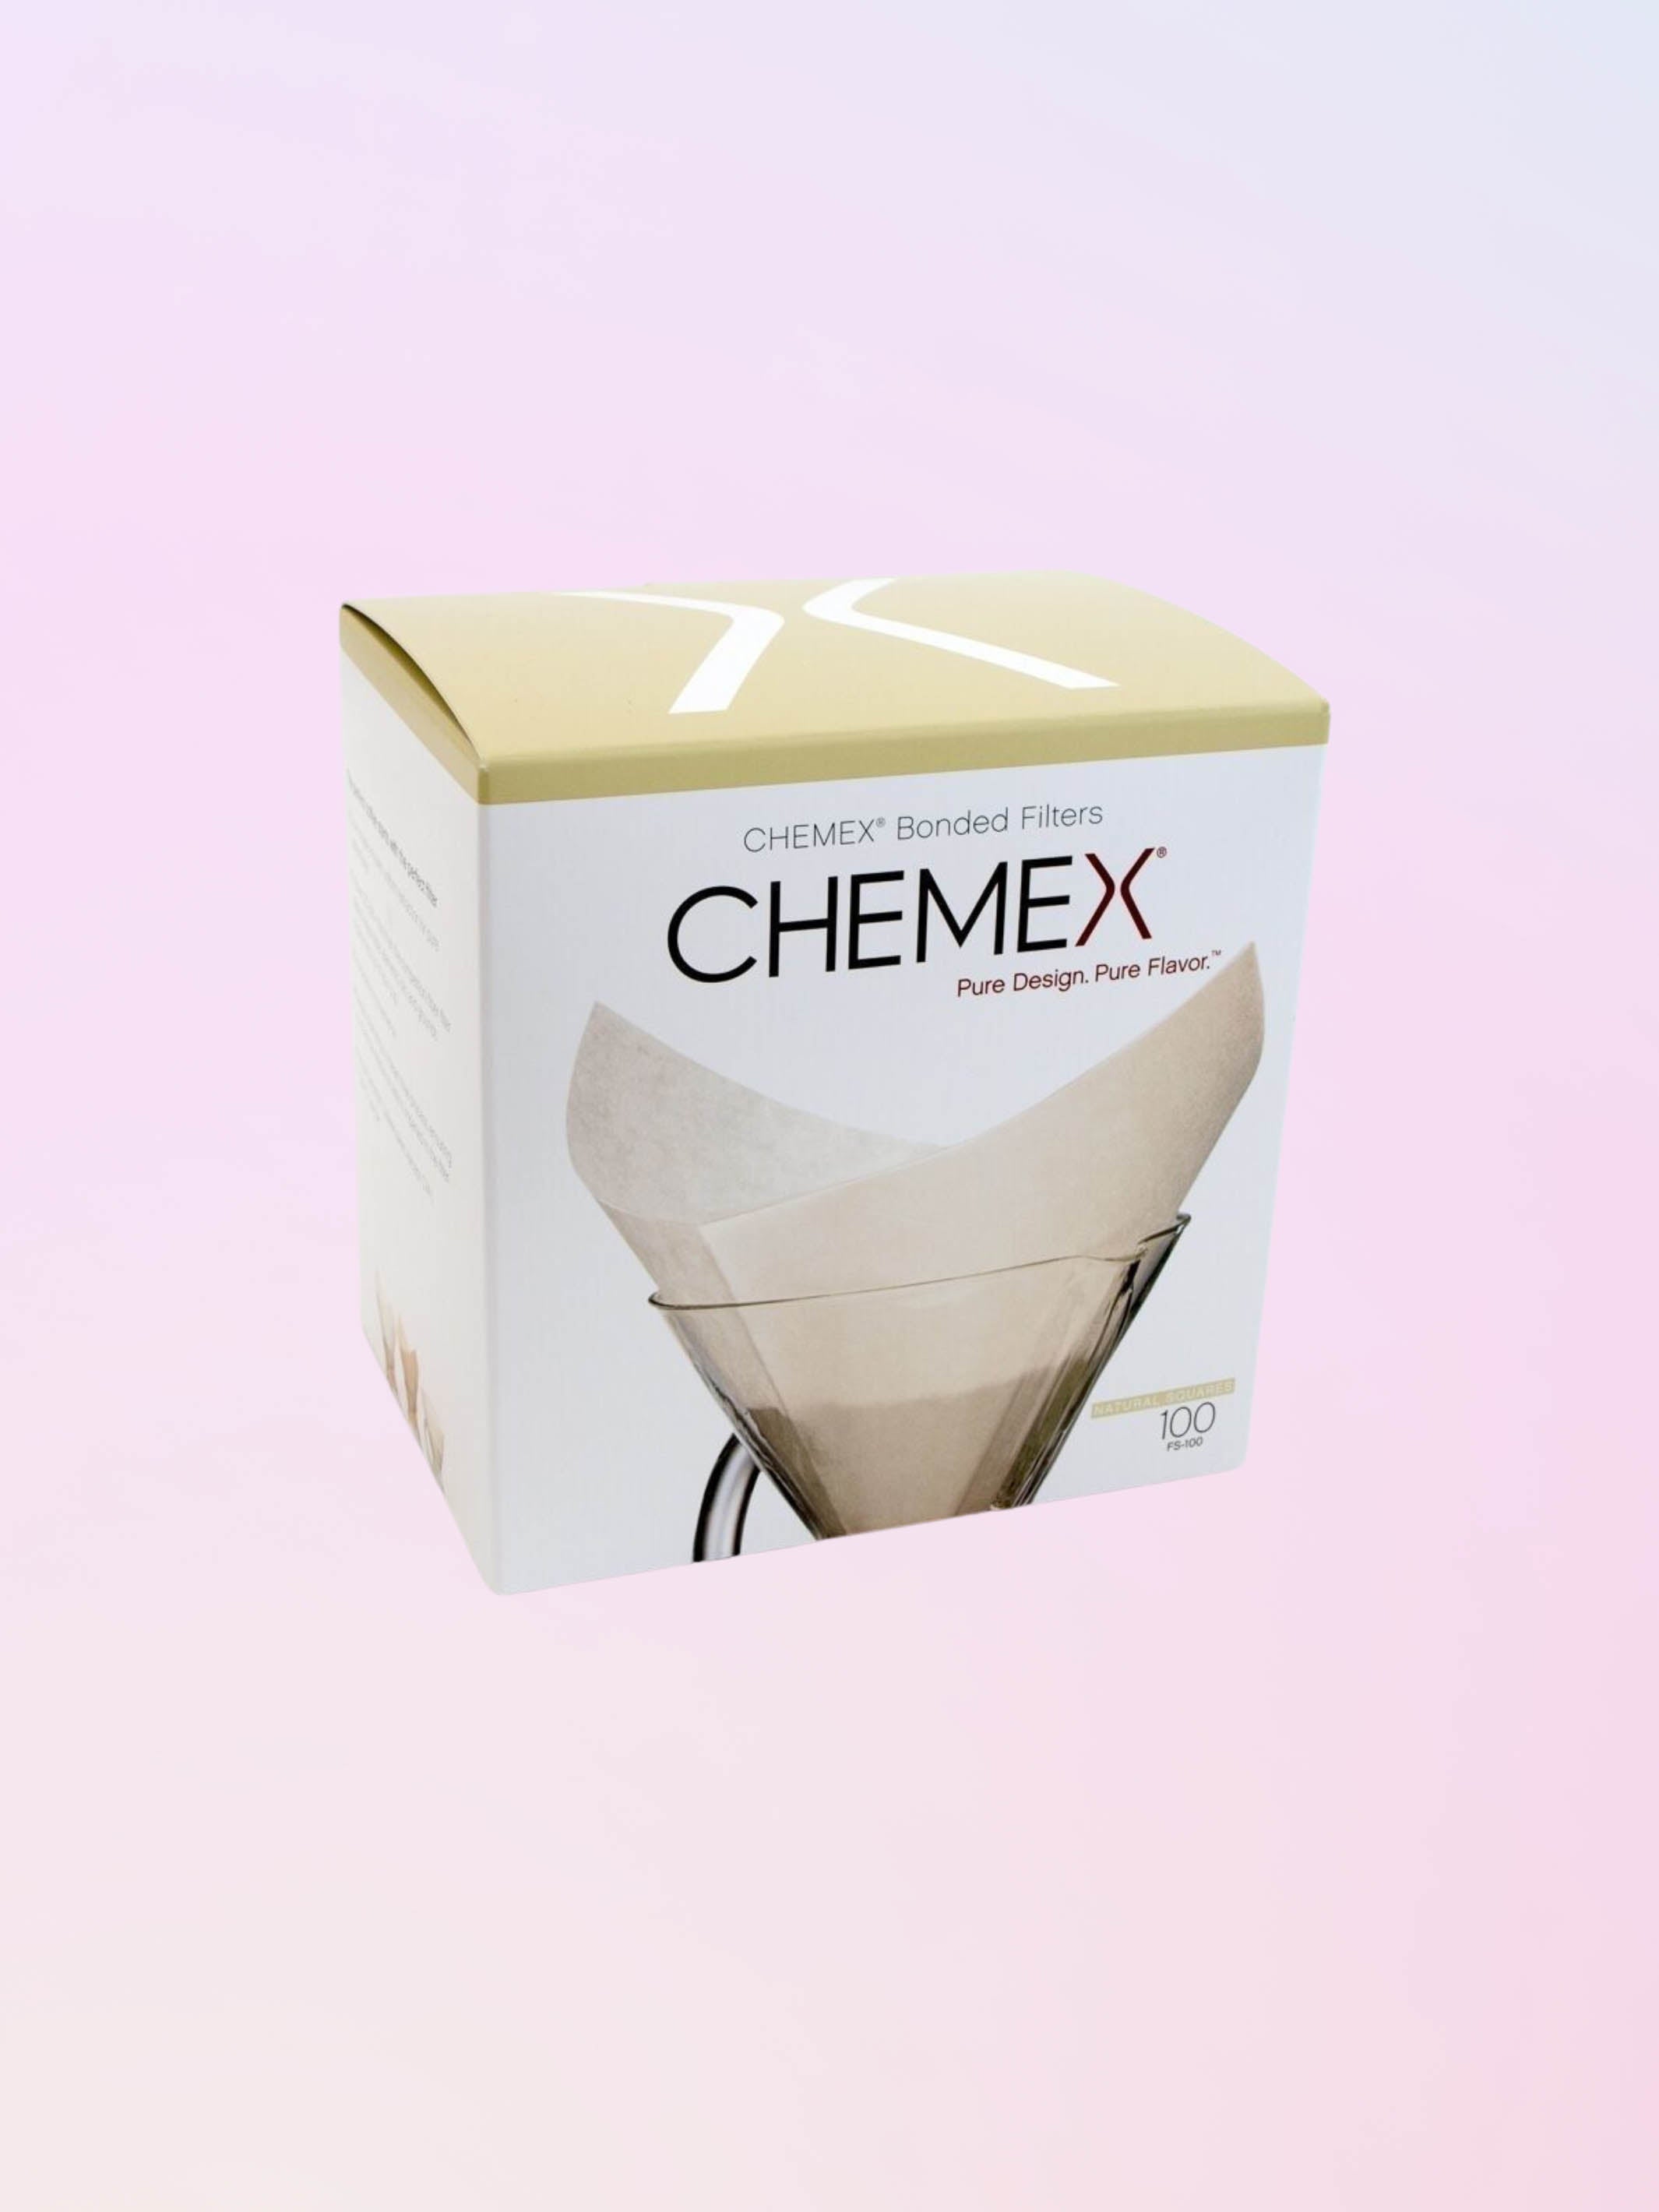 Chemex oxygen whitened square coffee filters.